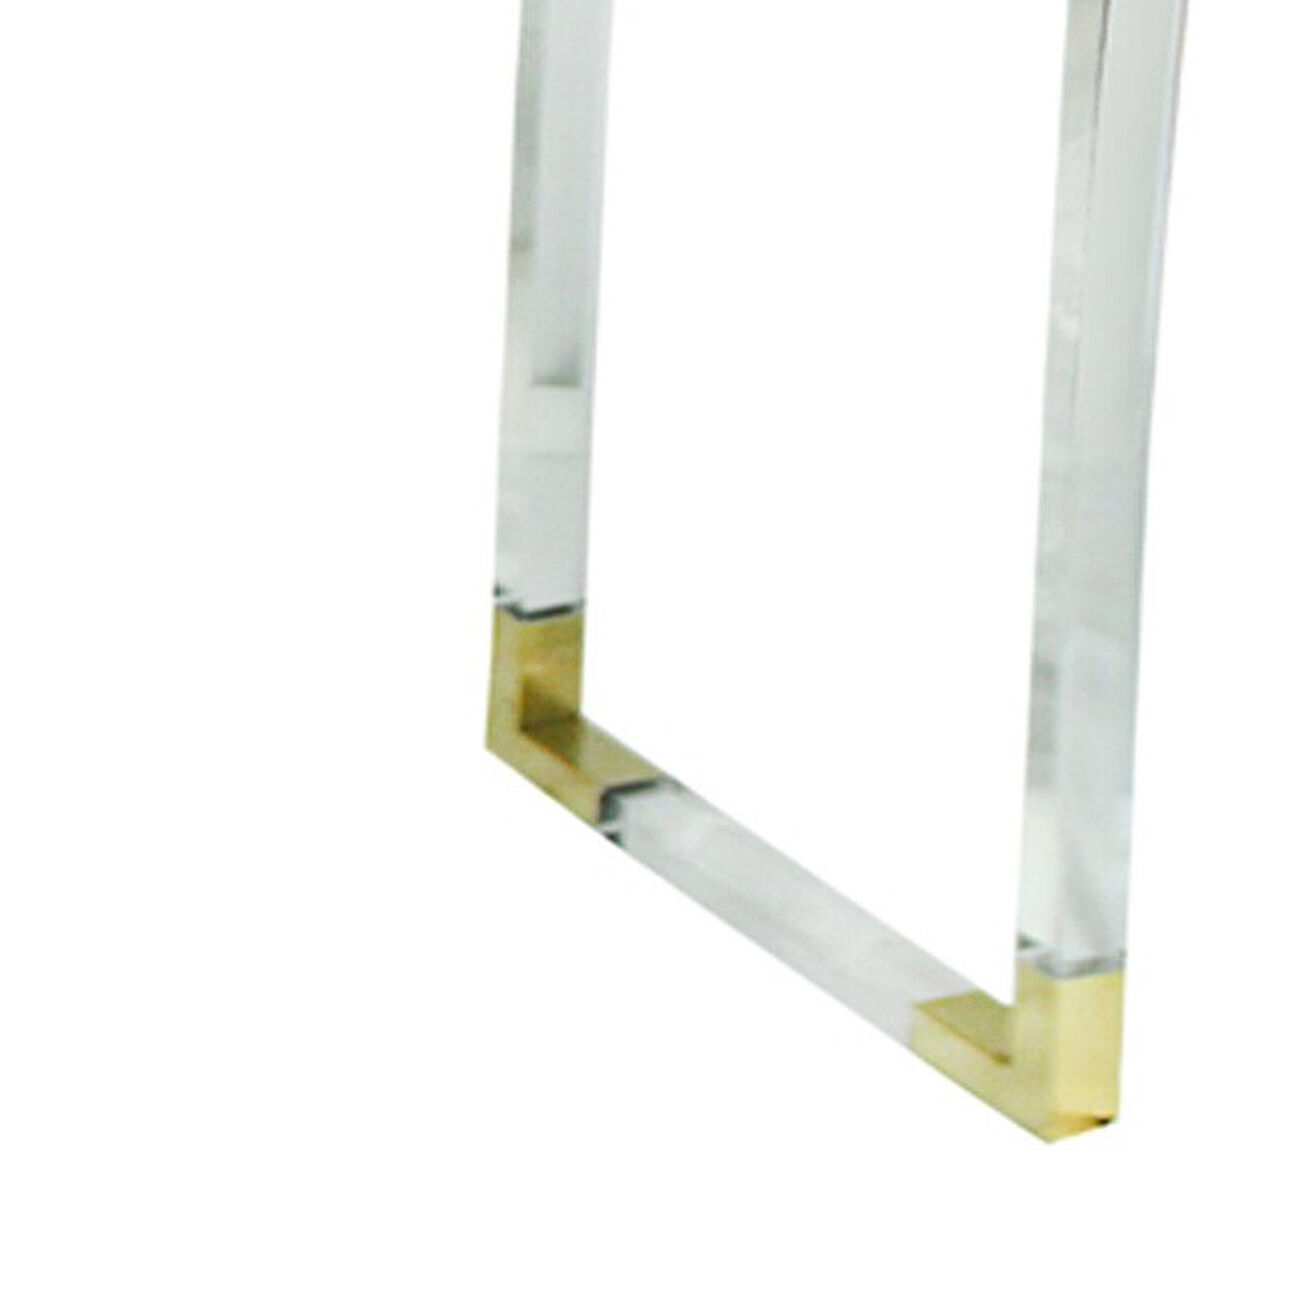 2 Drawer Wooden Console Table with Acrylic Legs, White and Gold